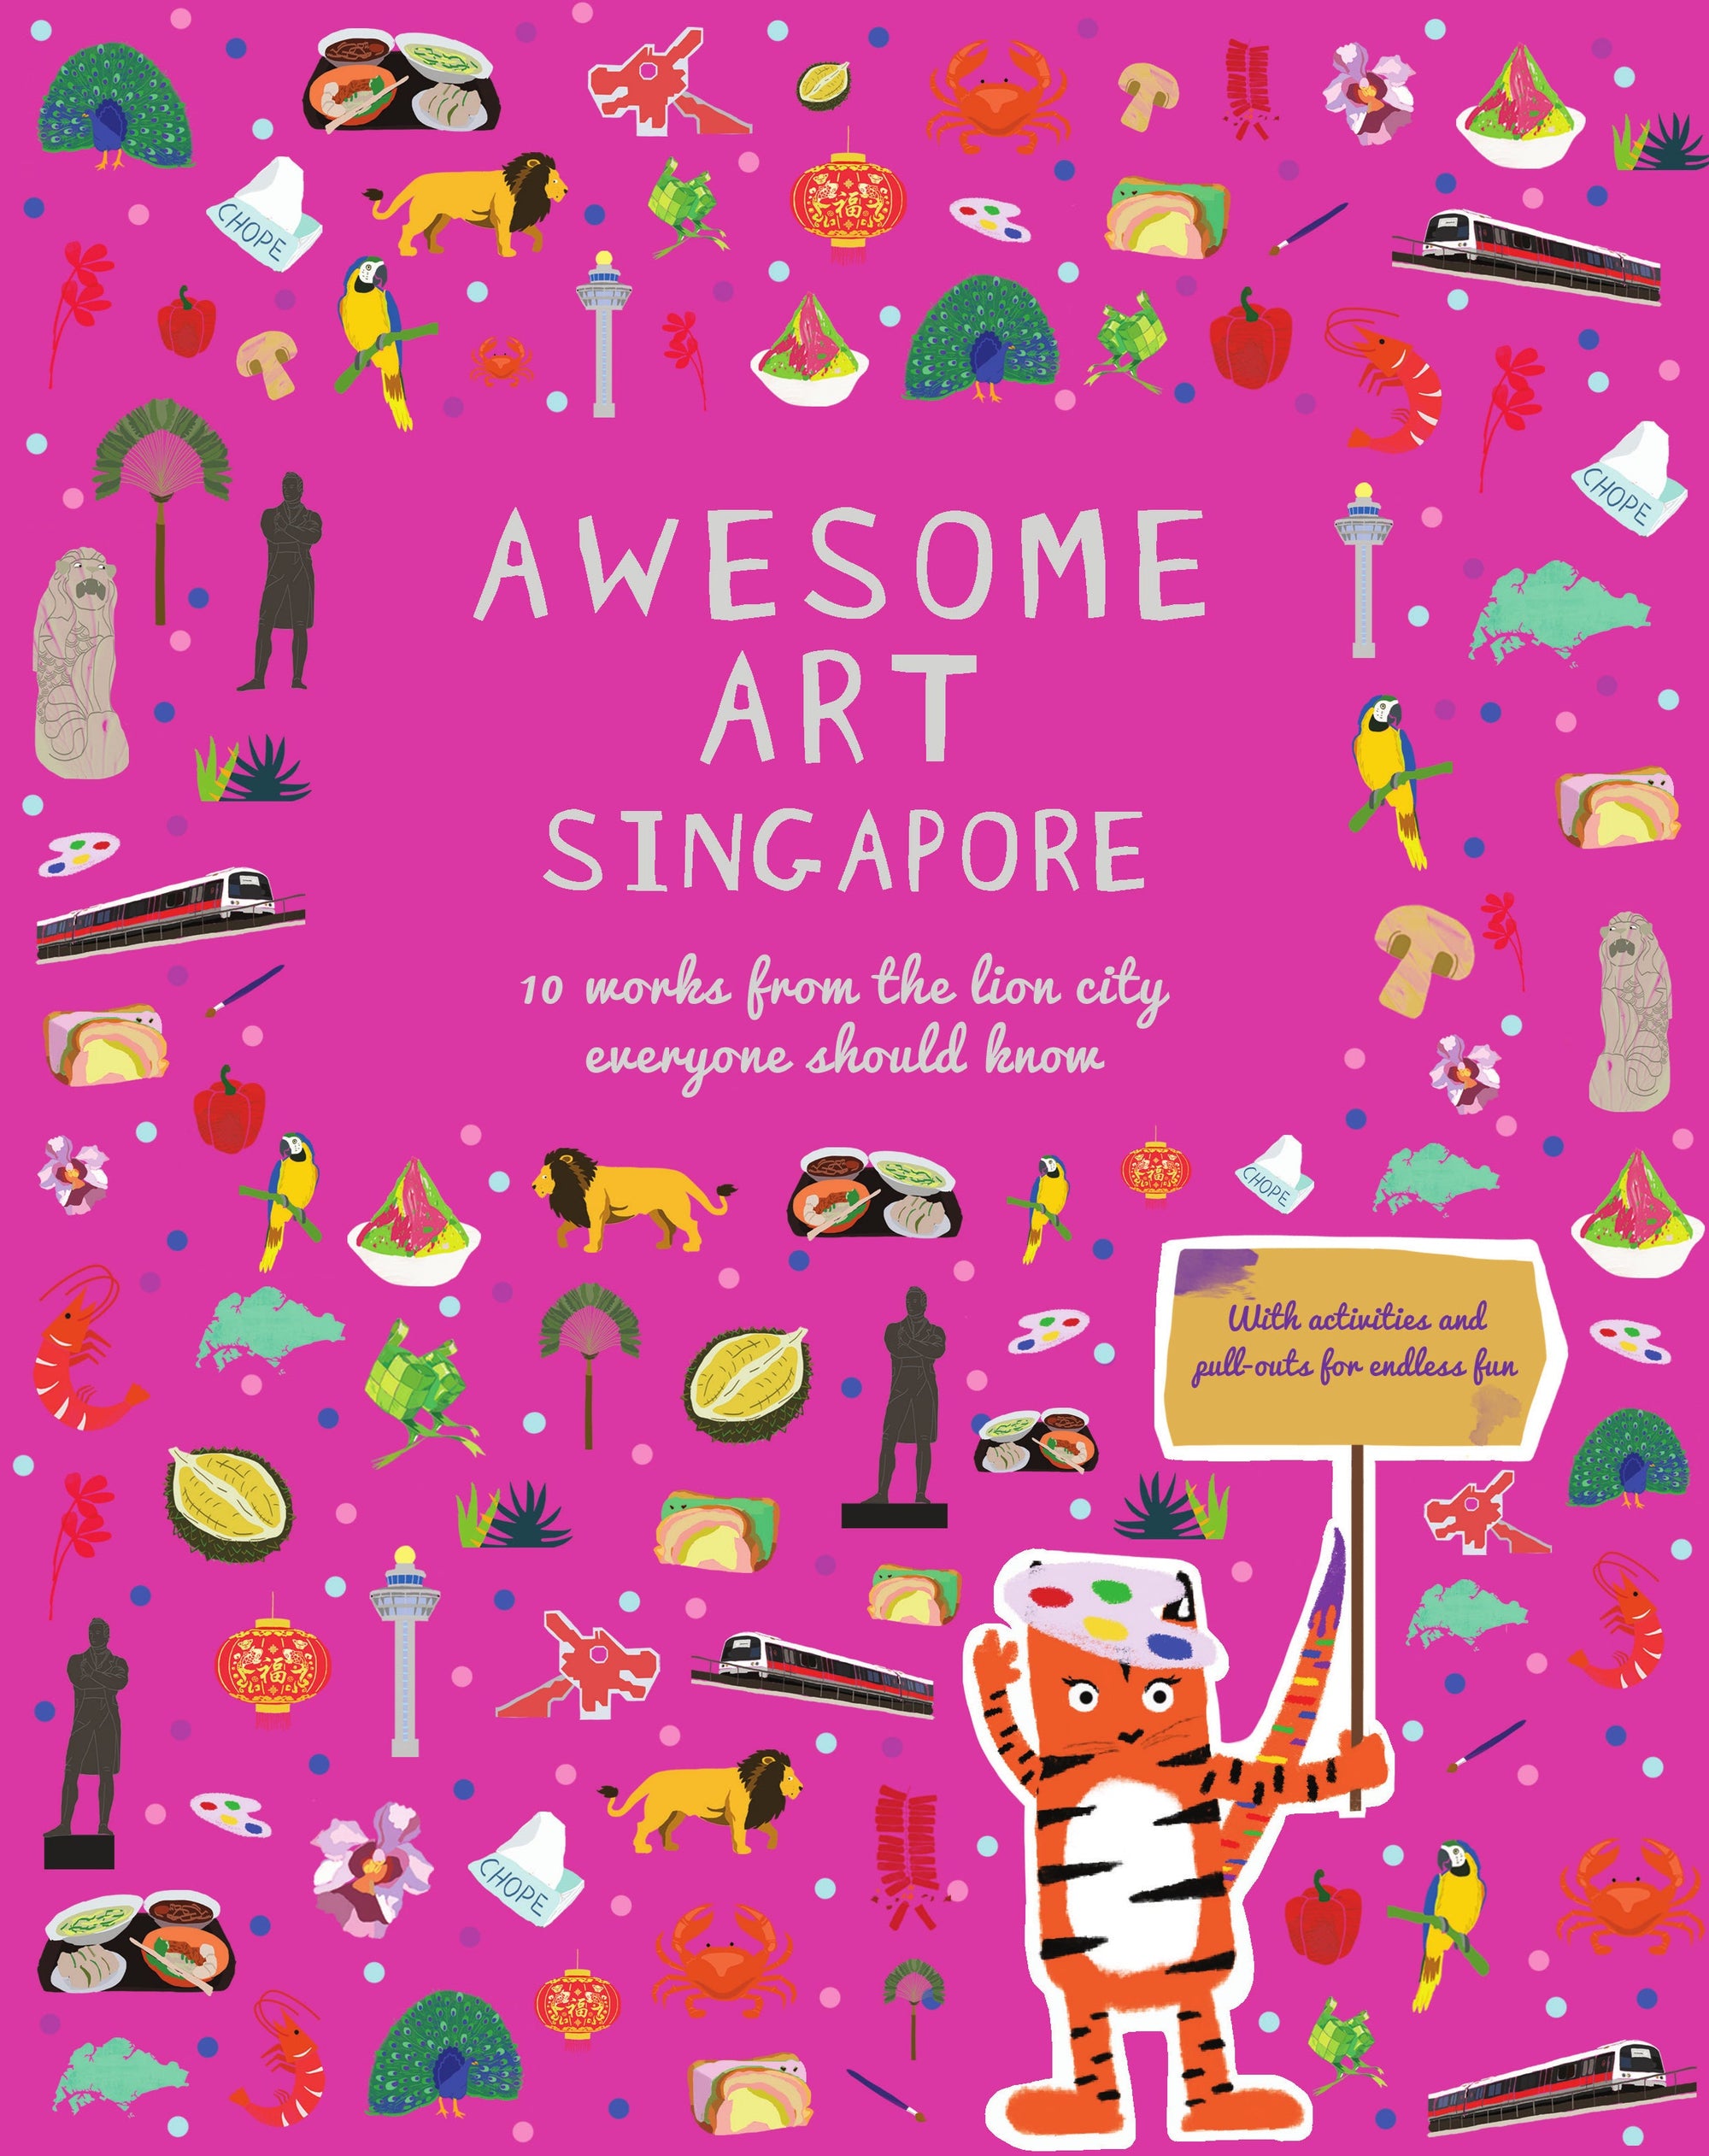 AWESOME ART SINGAPORE: 10 WORKS FROM THE LION CITY EVERYONE SHOULD KNOW